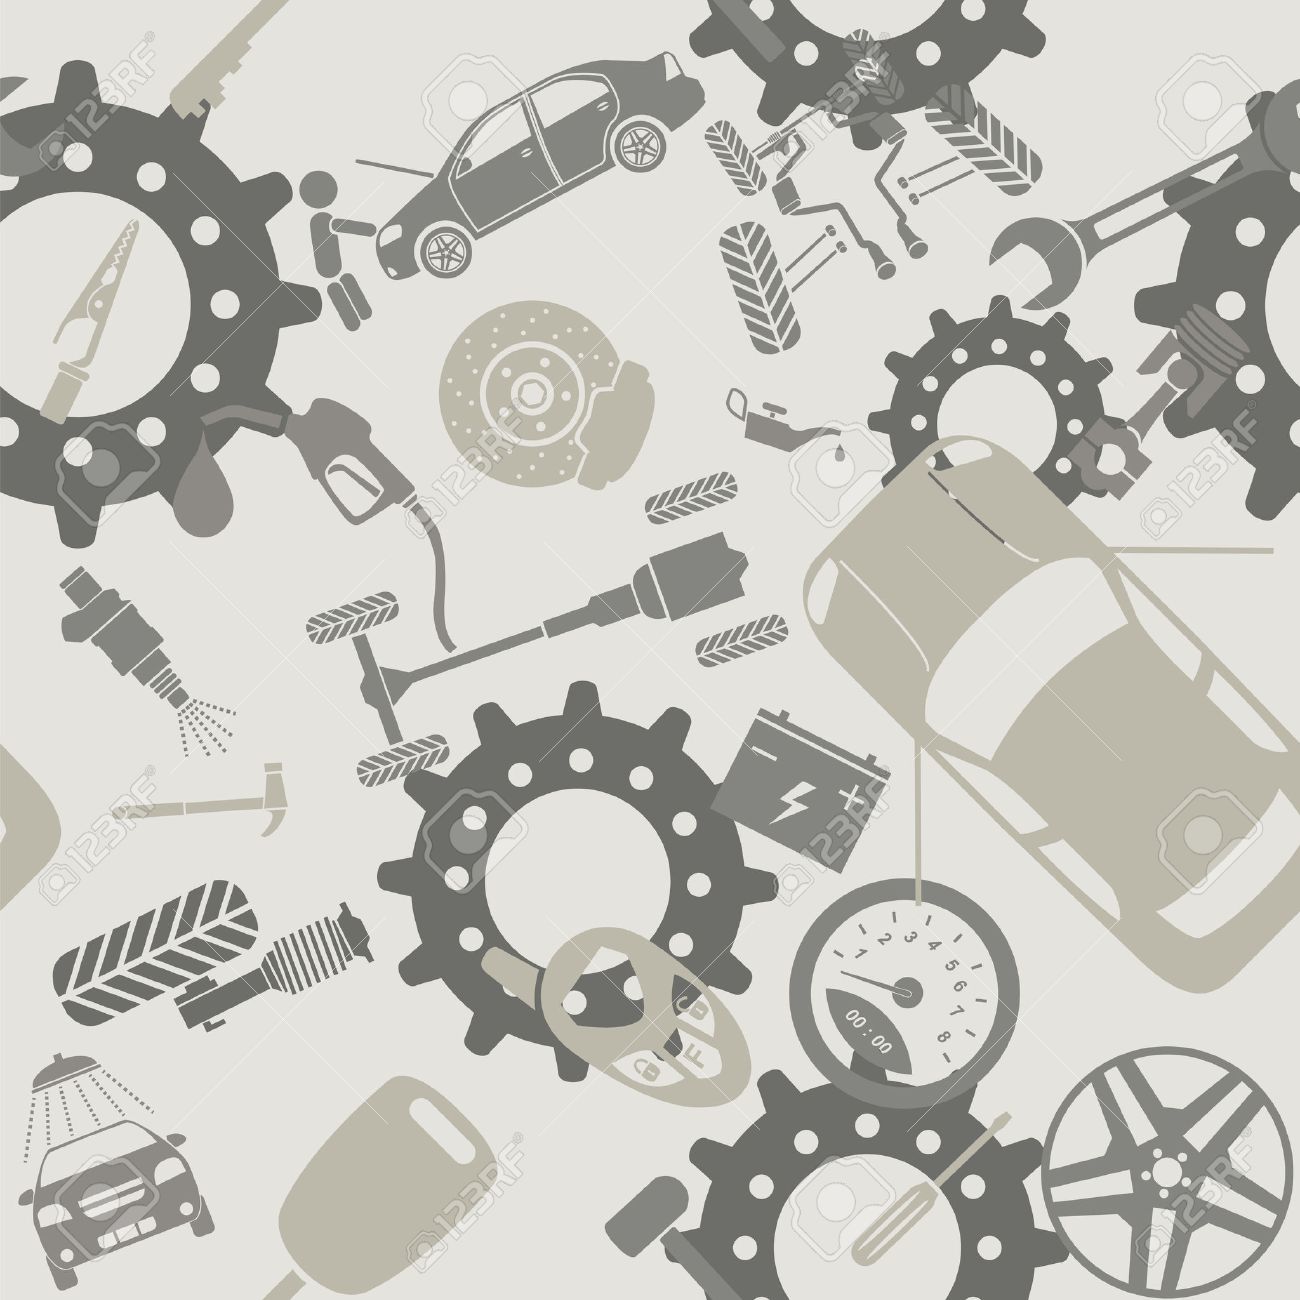 Car Service And Some Types Of Transportation Background Vector